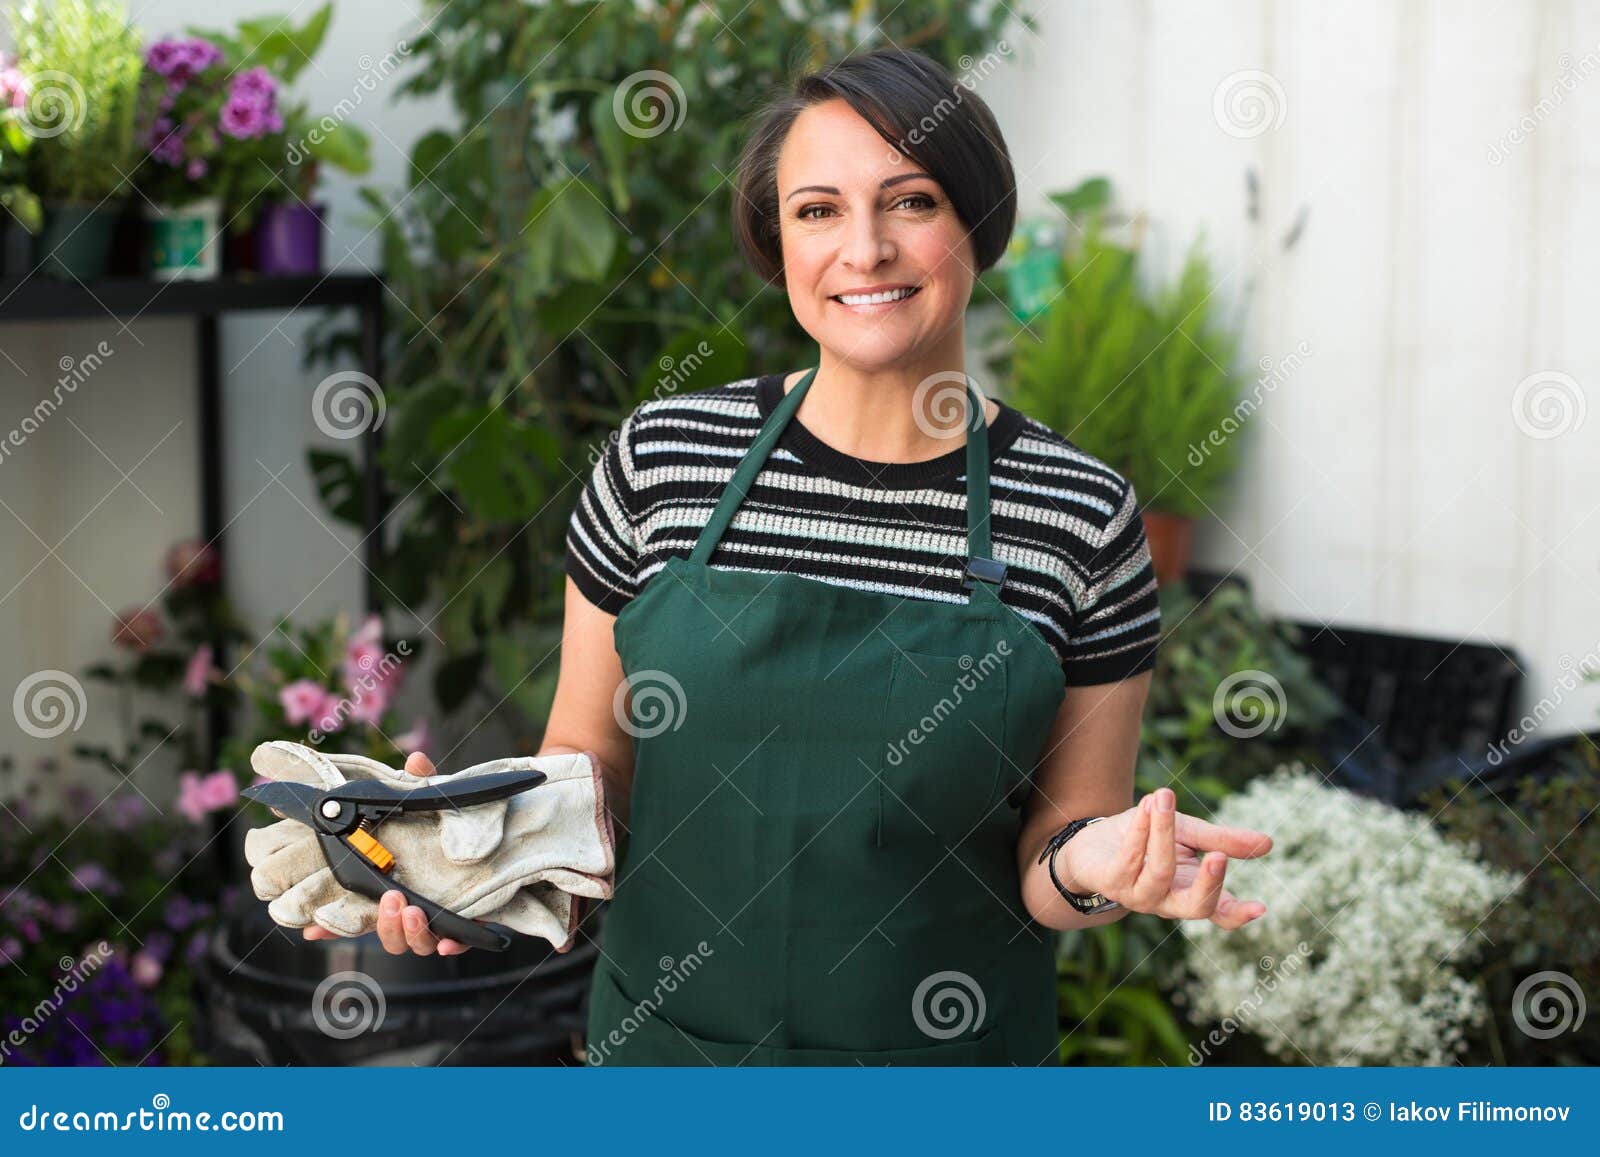 Florist with Tools in the Gardening Store Stock Image - Image of ...